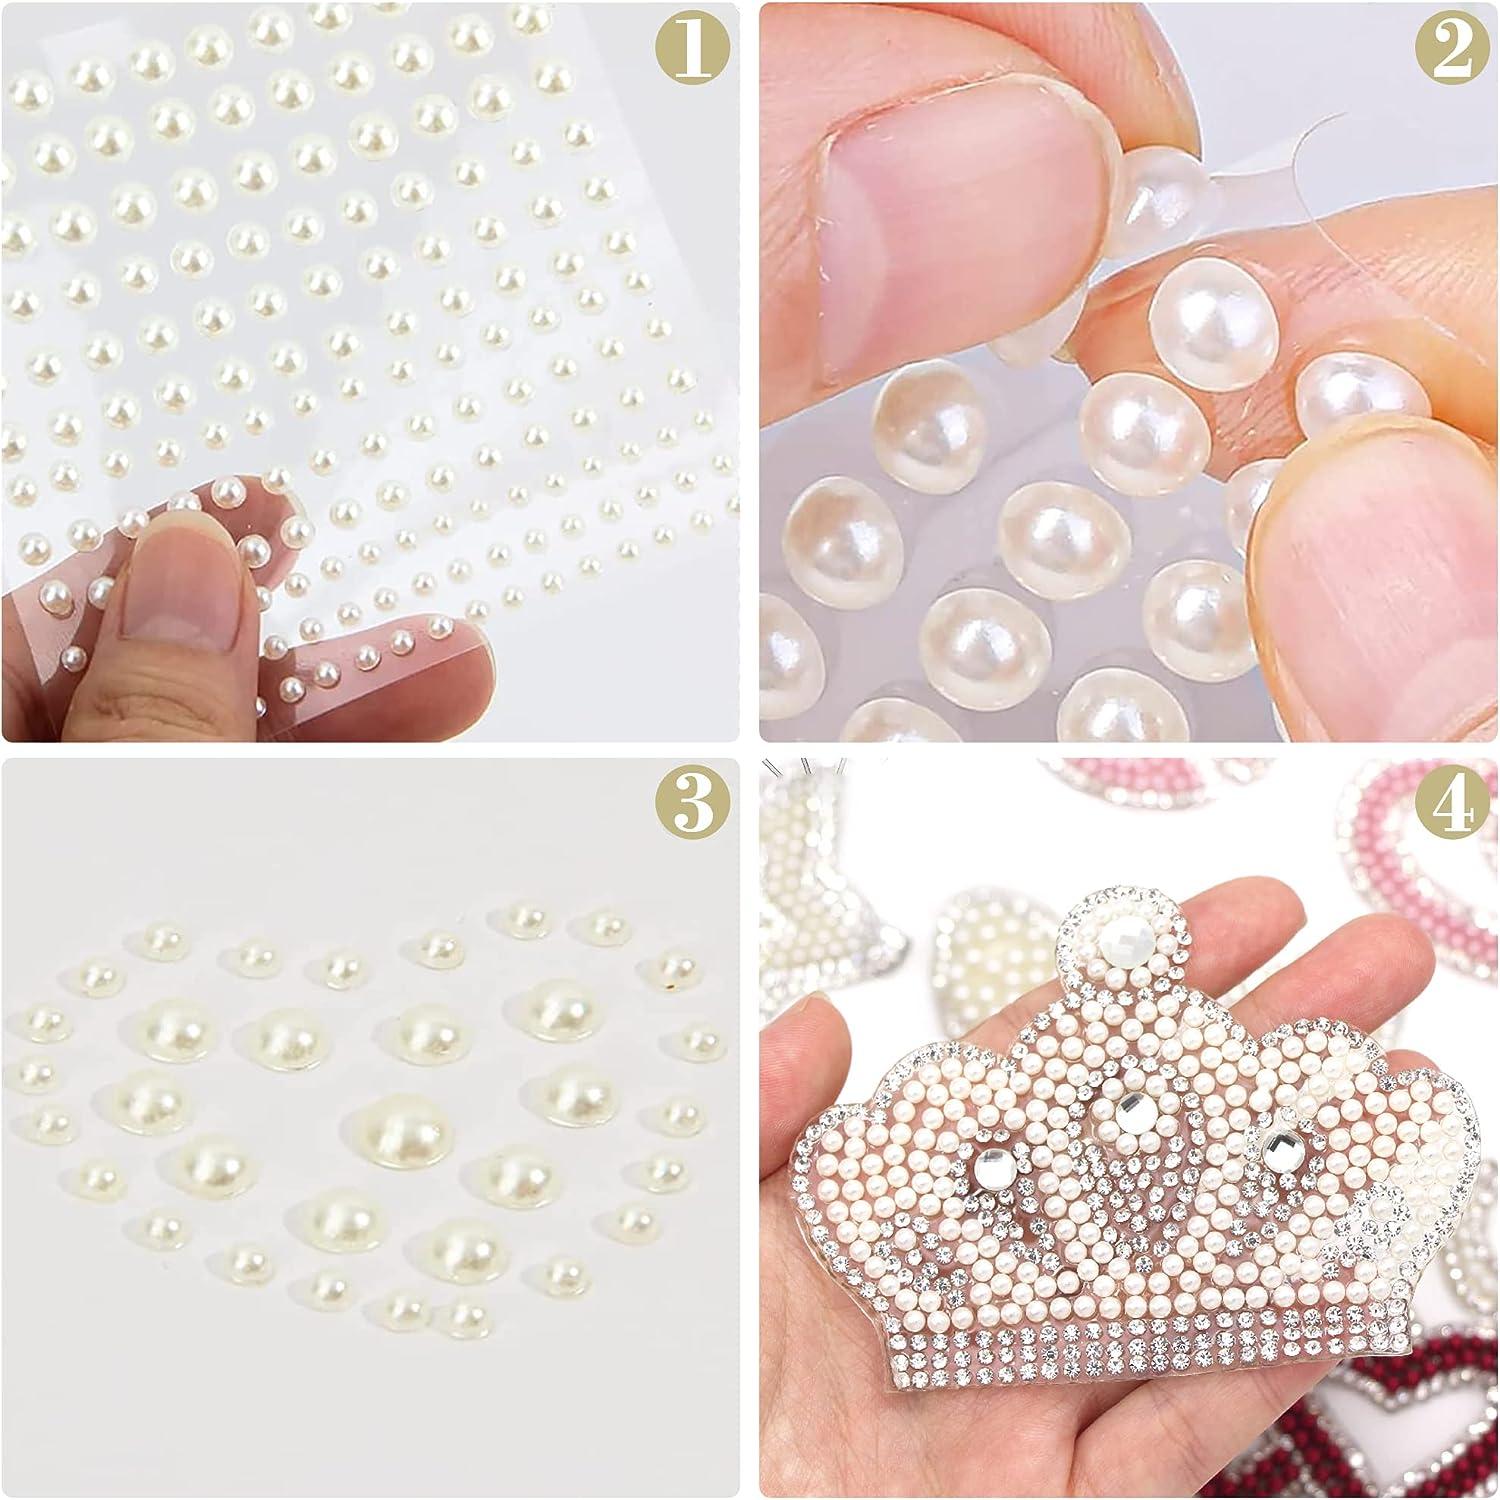 SPEESJOY Self Adhesive Pearl Stickers, Hair Pearls Stick on for Crafts Face, Makeup, Nail, Flat Back Pearl Assorted size, Perlas Para El Cabello de Mujer